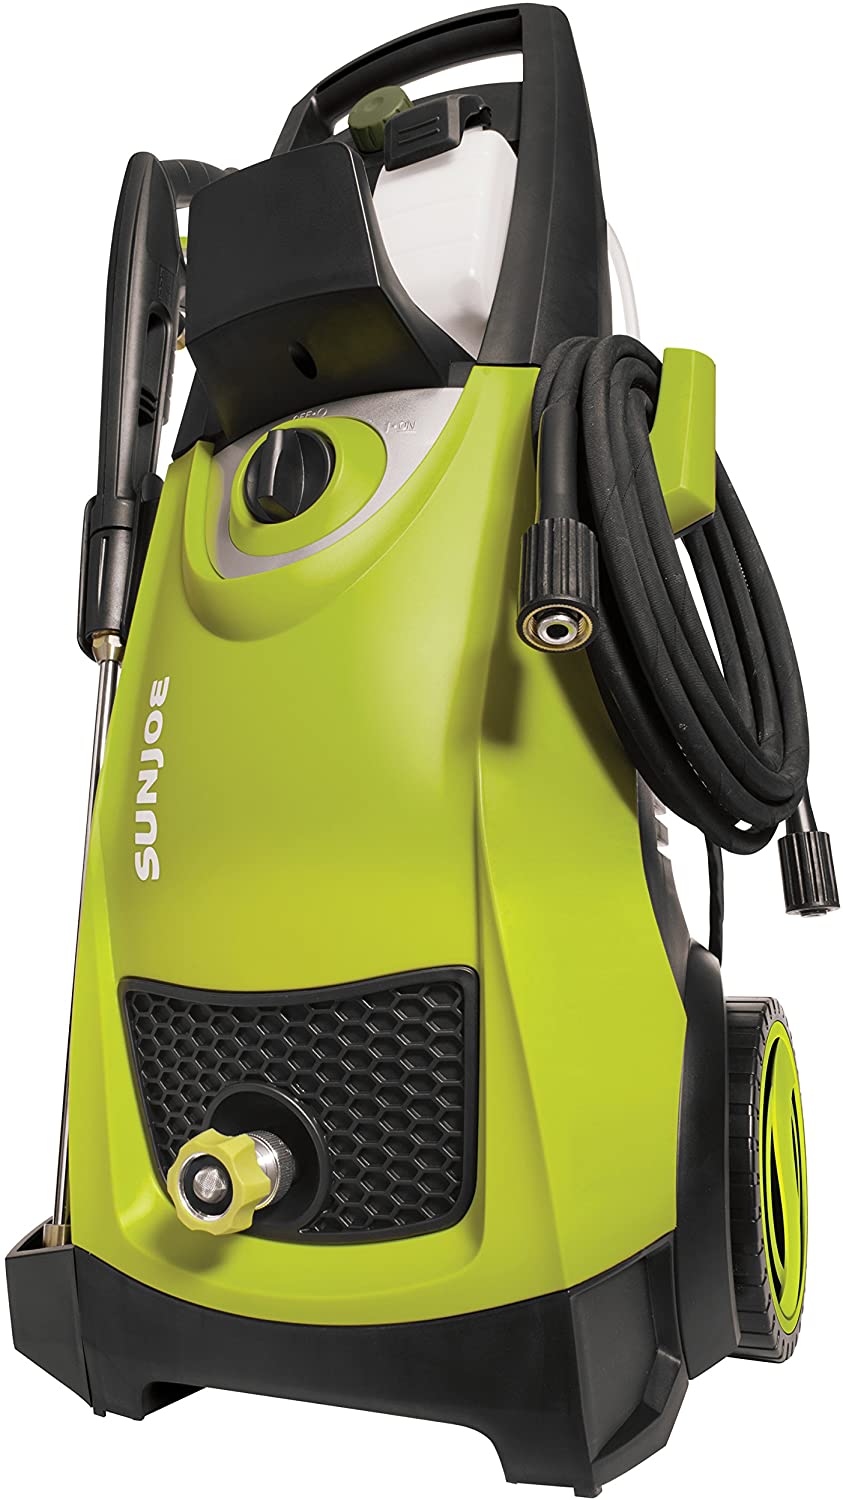 Cleans Cars/Fences/Patios Sun Joe SPX3000 2030 Max PSI 1.76 GPM 14.5-Amp Electric High Pressure Washer New